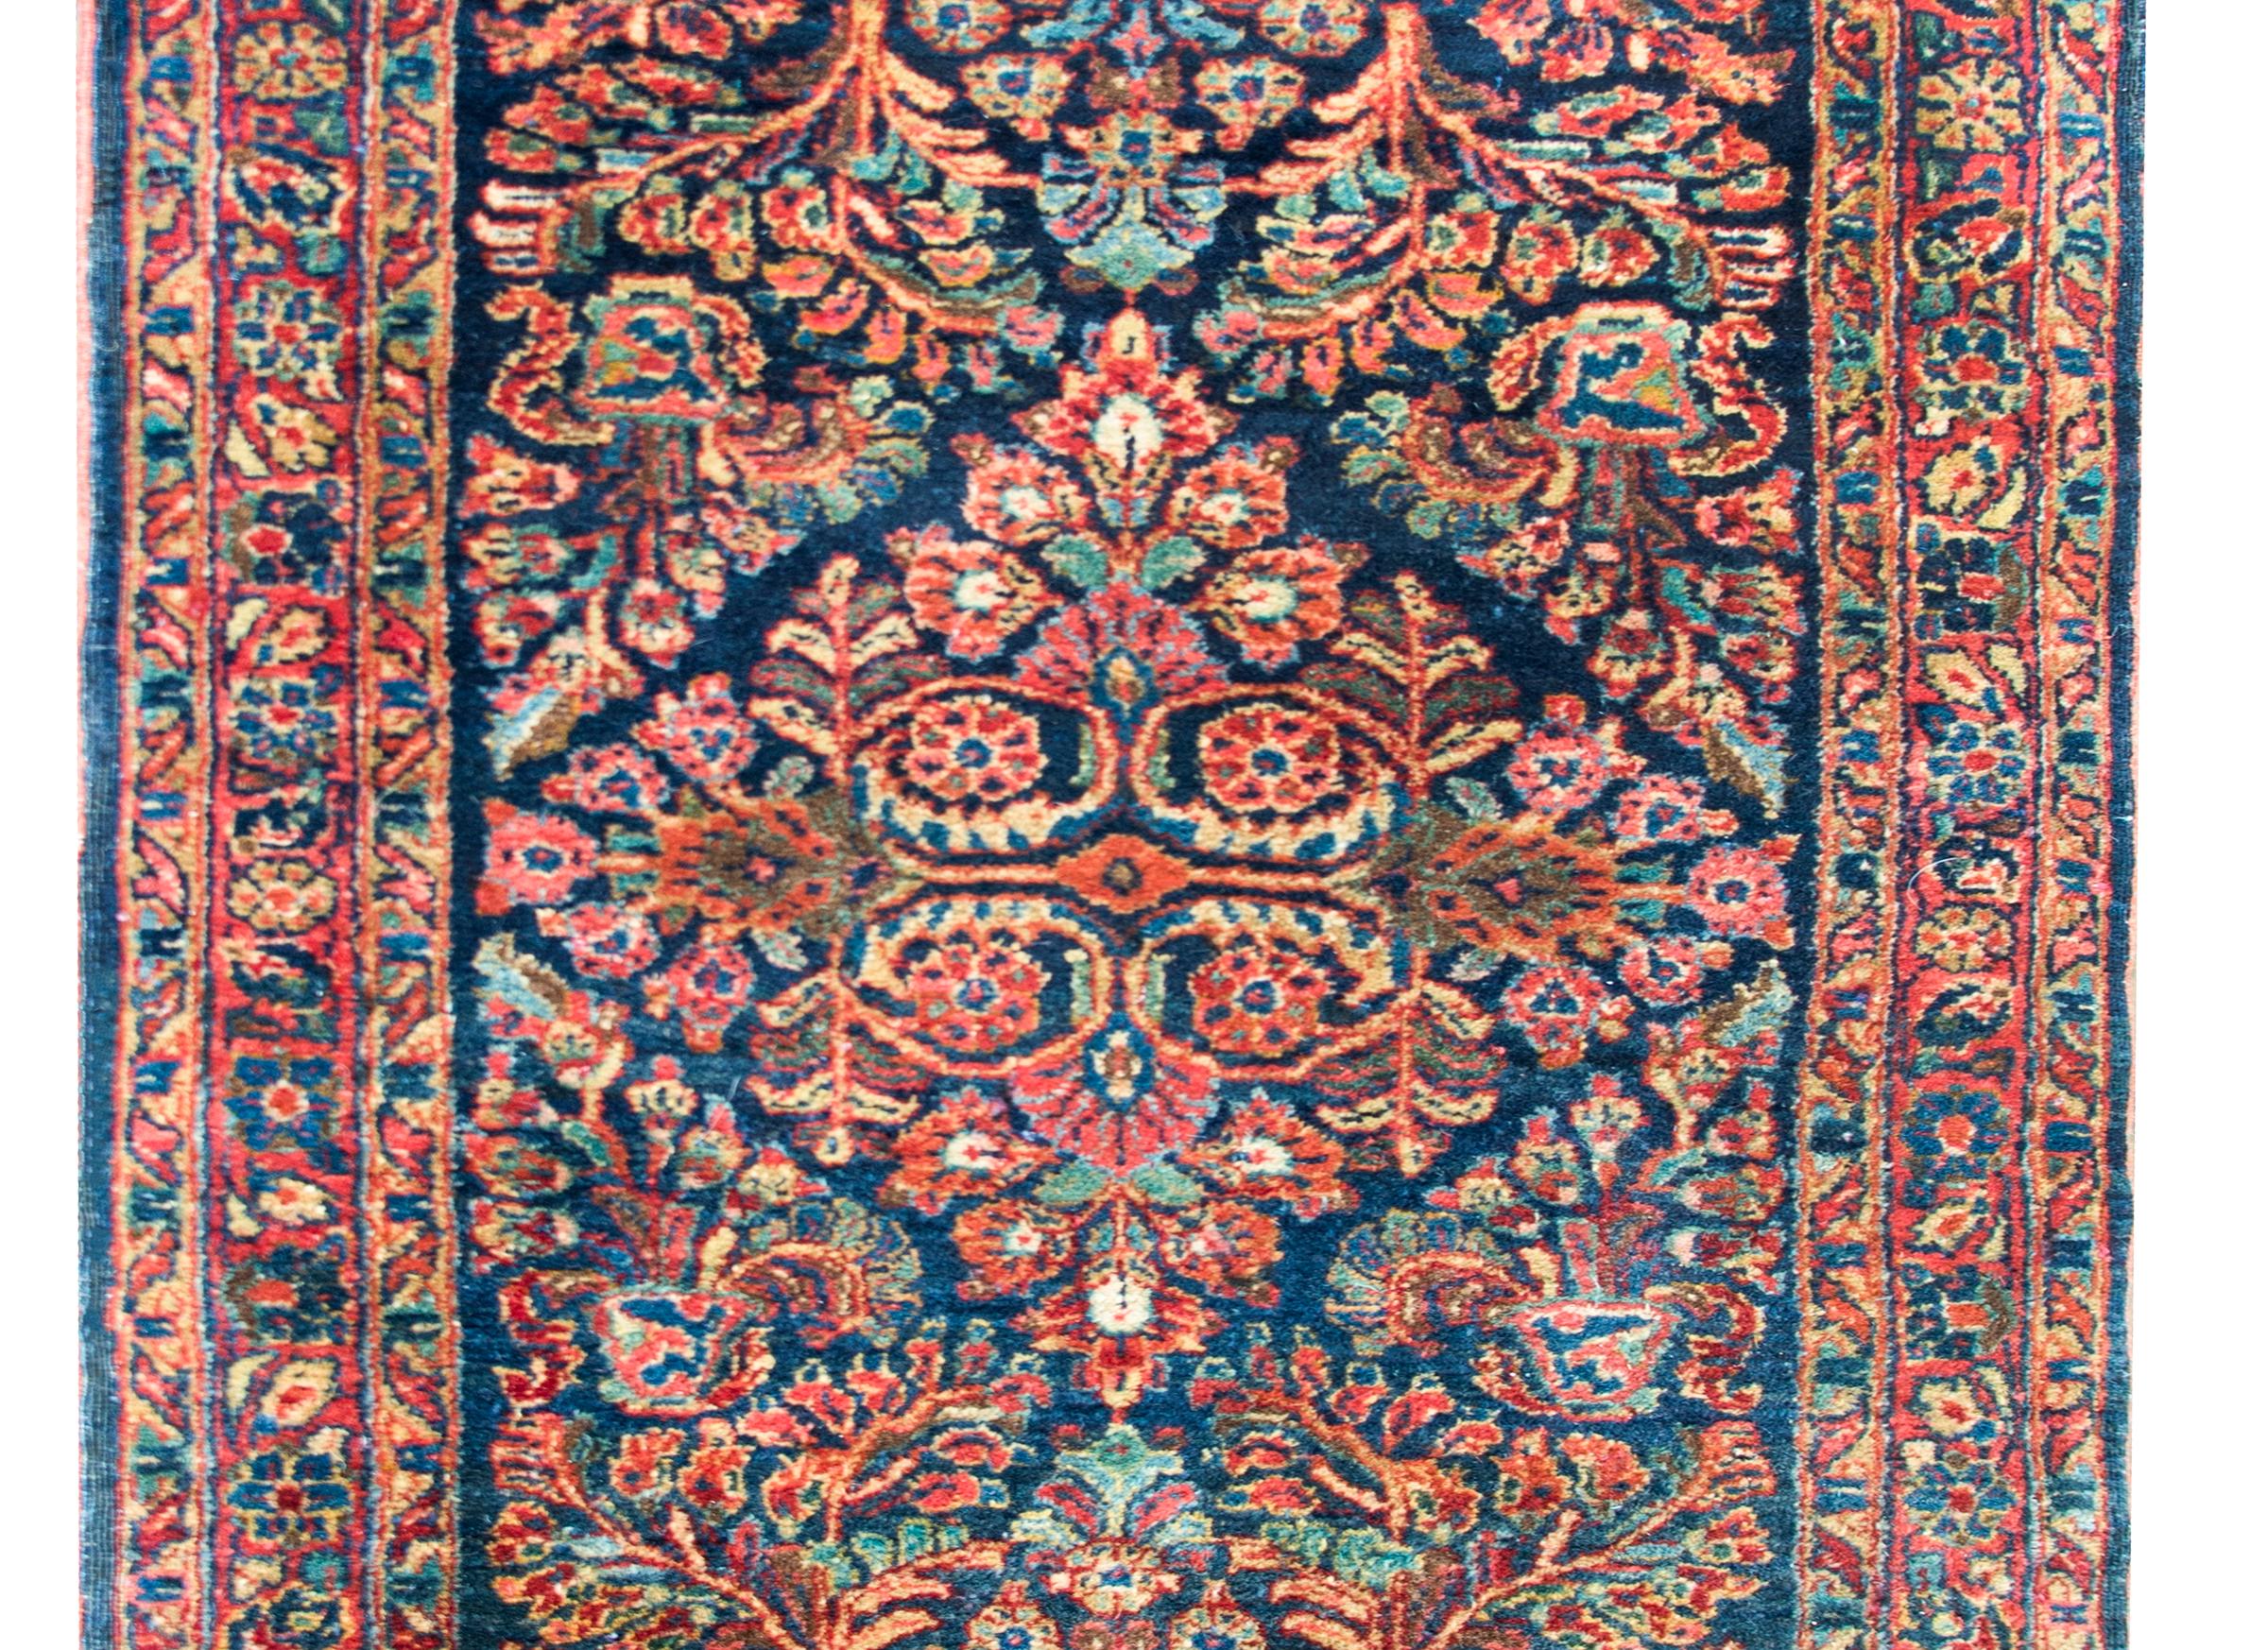 A gorgeous early 20th century Persian Sarouk rug with a large diamond floral medallion living admits a field of more flowers and leaves, and surrounded by a complex border of even more flowers and leaves, and all woven in traditional Sarouk colors